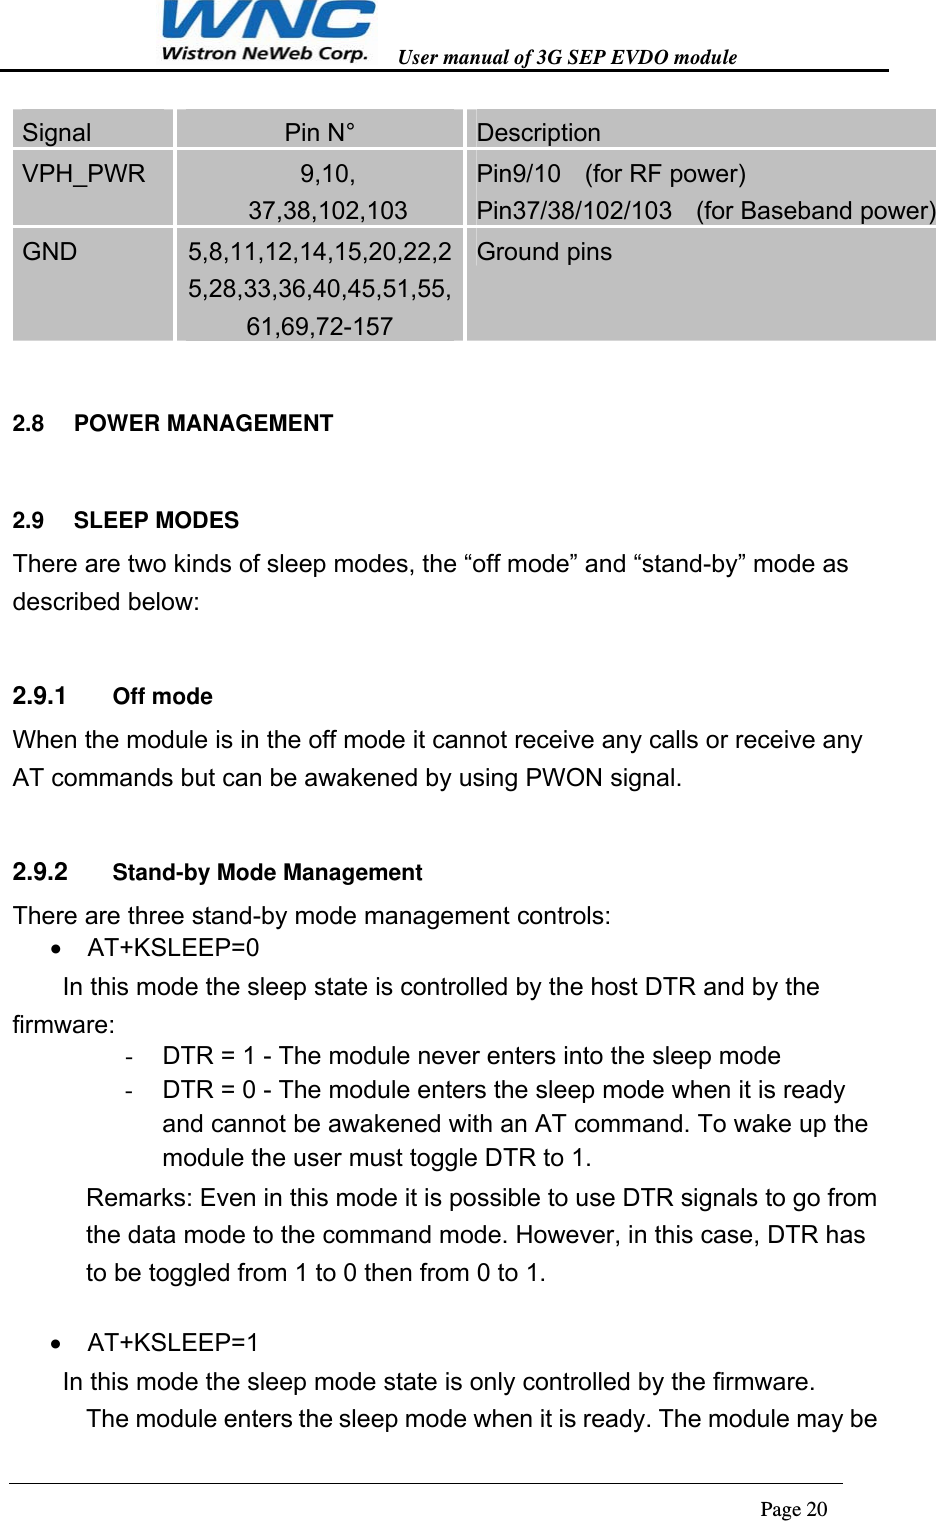   User manual of 3G SEP EVDO module                                                                      Page 20  Signal  Pin N°  Description VPH_PWR  9,10, 37,38,102,103 Pin9/10    (for RF power) Pin37/38/102/103    (for Baseband power) GND  5,8,11,12,14,15,20,22,25,28,33,36,40,45,51,55,61,69,72-157 Ground pins 2.8  POWER MANAGEMENT 2.9  SLEEP MODES There are two kinds of sleep modes, the “off mode” and “stand-by” mode as described below: 2.9.1  Off mode When the module is in the off mode it cannot receive any calls or receive any AT commands but can be awakened by using PWON signal.   2.9.2  Stand-by Mode Management There are three stand-by mode management controls:  AT+KSLEEP=0   In this mode the sleep state is controlled by the host DTR and by the firmware: -  DTR = 1 - The module never enters into the sleep mode -  DTR = 0 - The module enters the sleep mode when it is ready and cannot be awakened with an AT command. To wake up the module the user must toggle DTR to 1. Remarks: Even in this mode it is possible to use DTR signals to go from the data mode to the command mode. However, in this case, DTR has to be toggled from 1 to 0 then from 0 to 1.   AT+KSLEEP=1   In this mode the sleep mode state is only controlled by the firmware. The module enters the sleep mode when it is ready. The module may be 